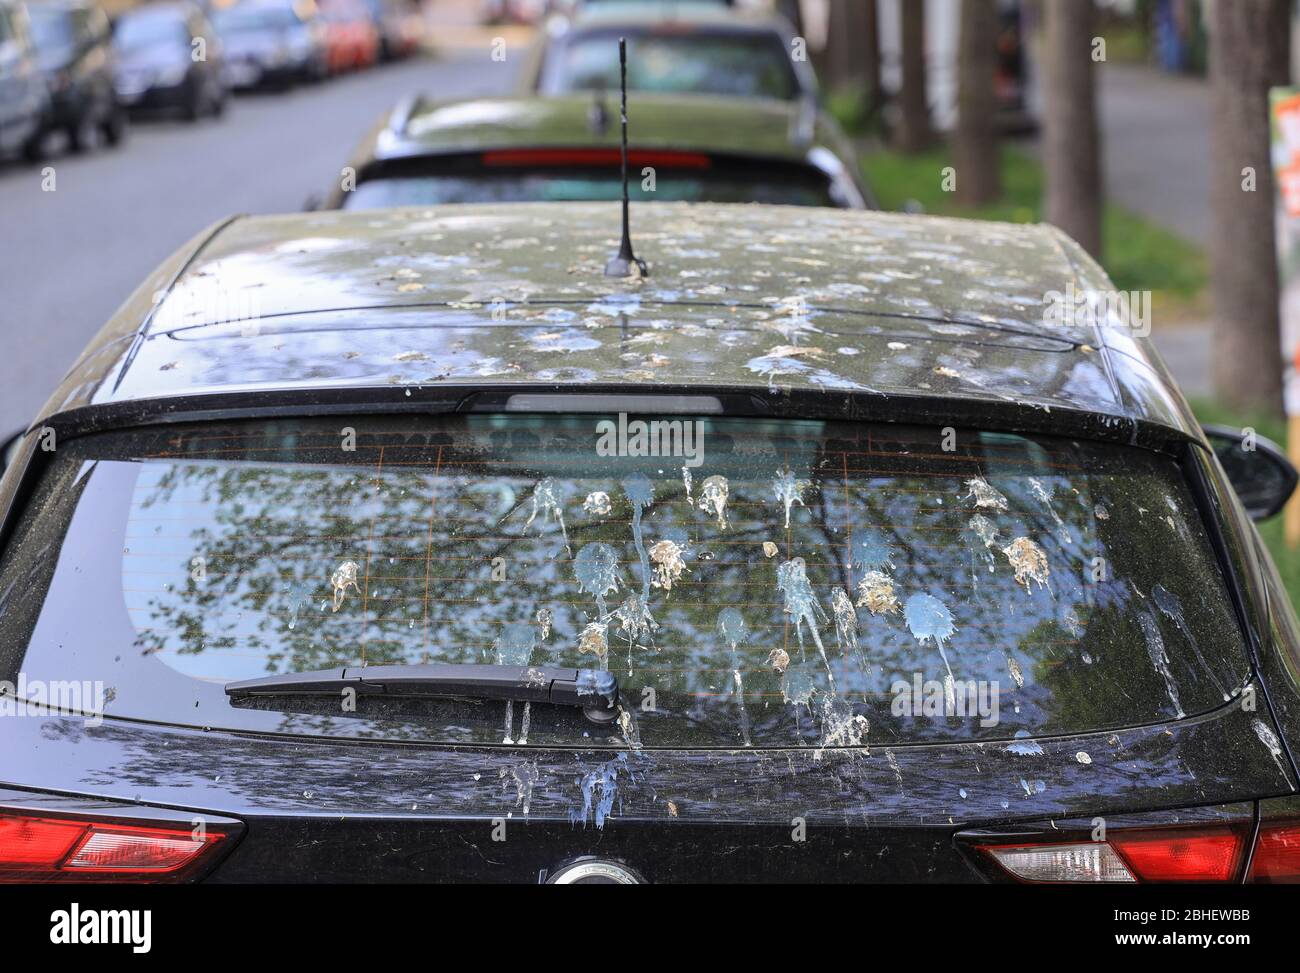 Bird droppings covering a parked car in the street. Stock Photo